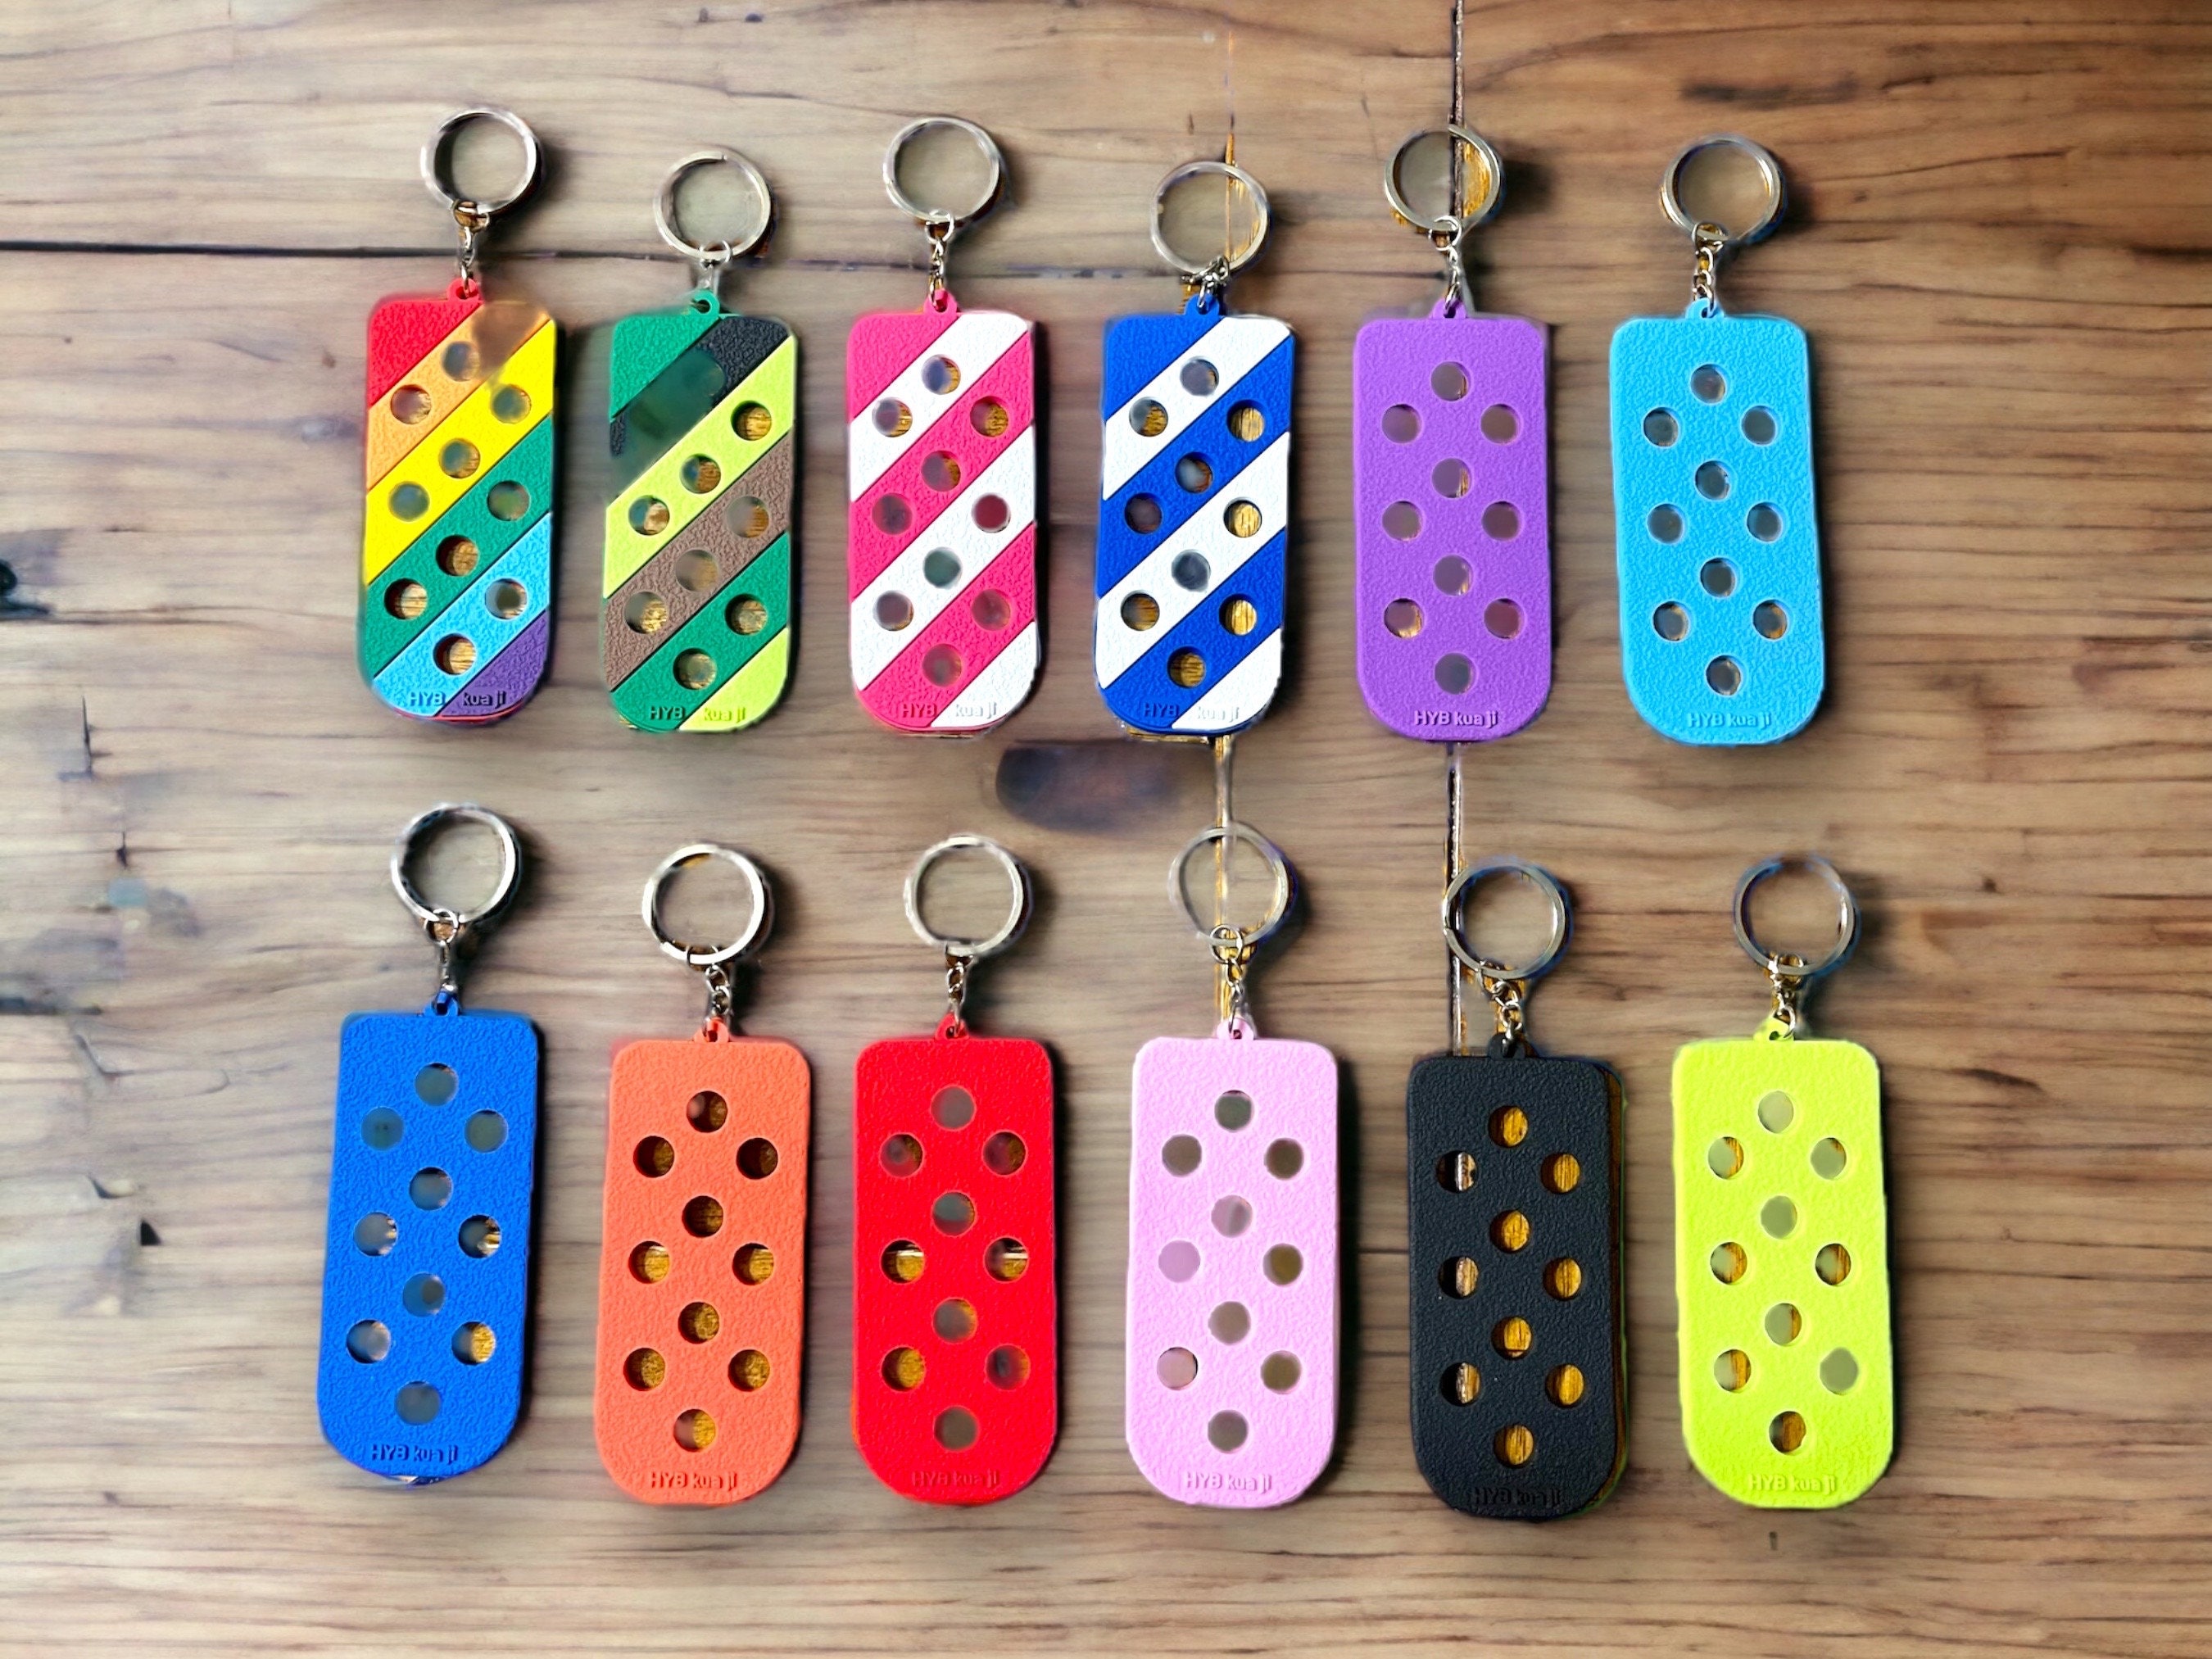 Keychains/charm Holder Keychain/backpack Charm Tags/inspired Croc Charm  Keychains/gifts for All/party Favors/kids/adults/silicone Keychains 